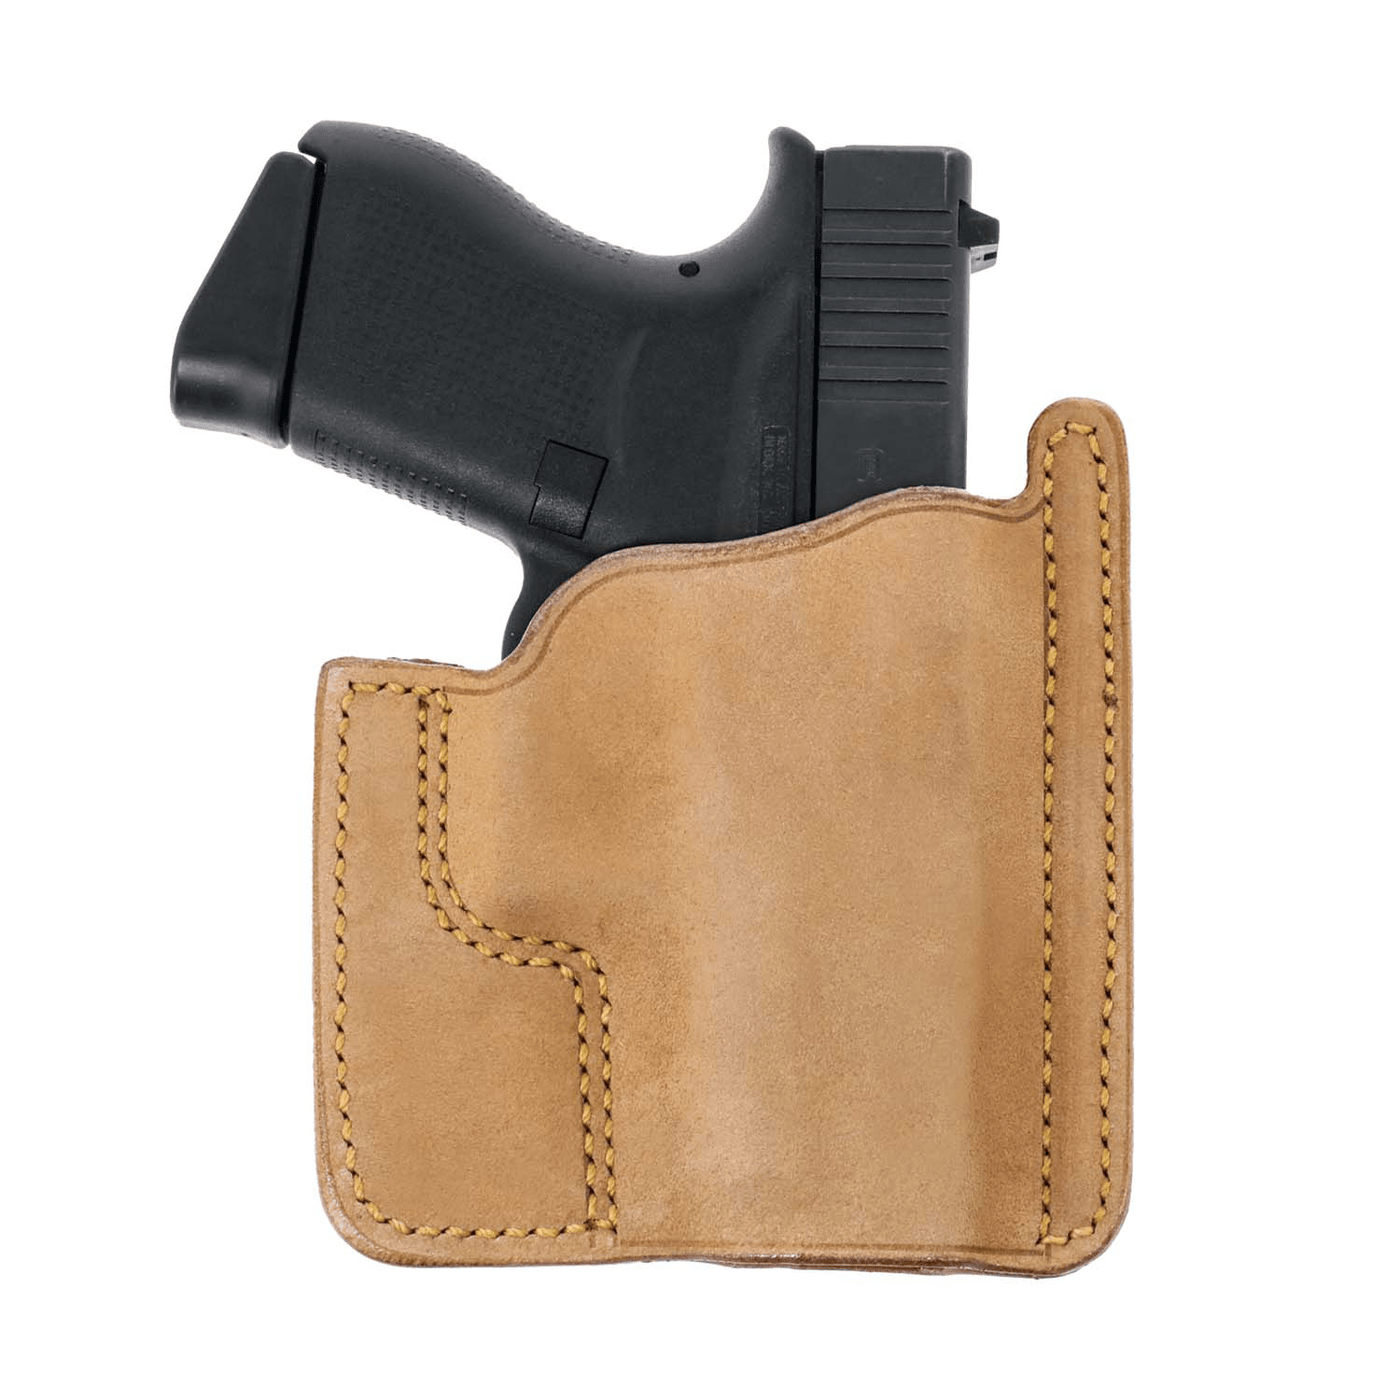 Galco Galco Front Pocket, Galco Ph800    Frnt Pocket   Glk43         Natural Firearm Accessories